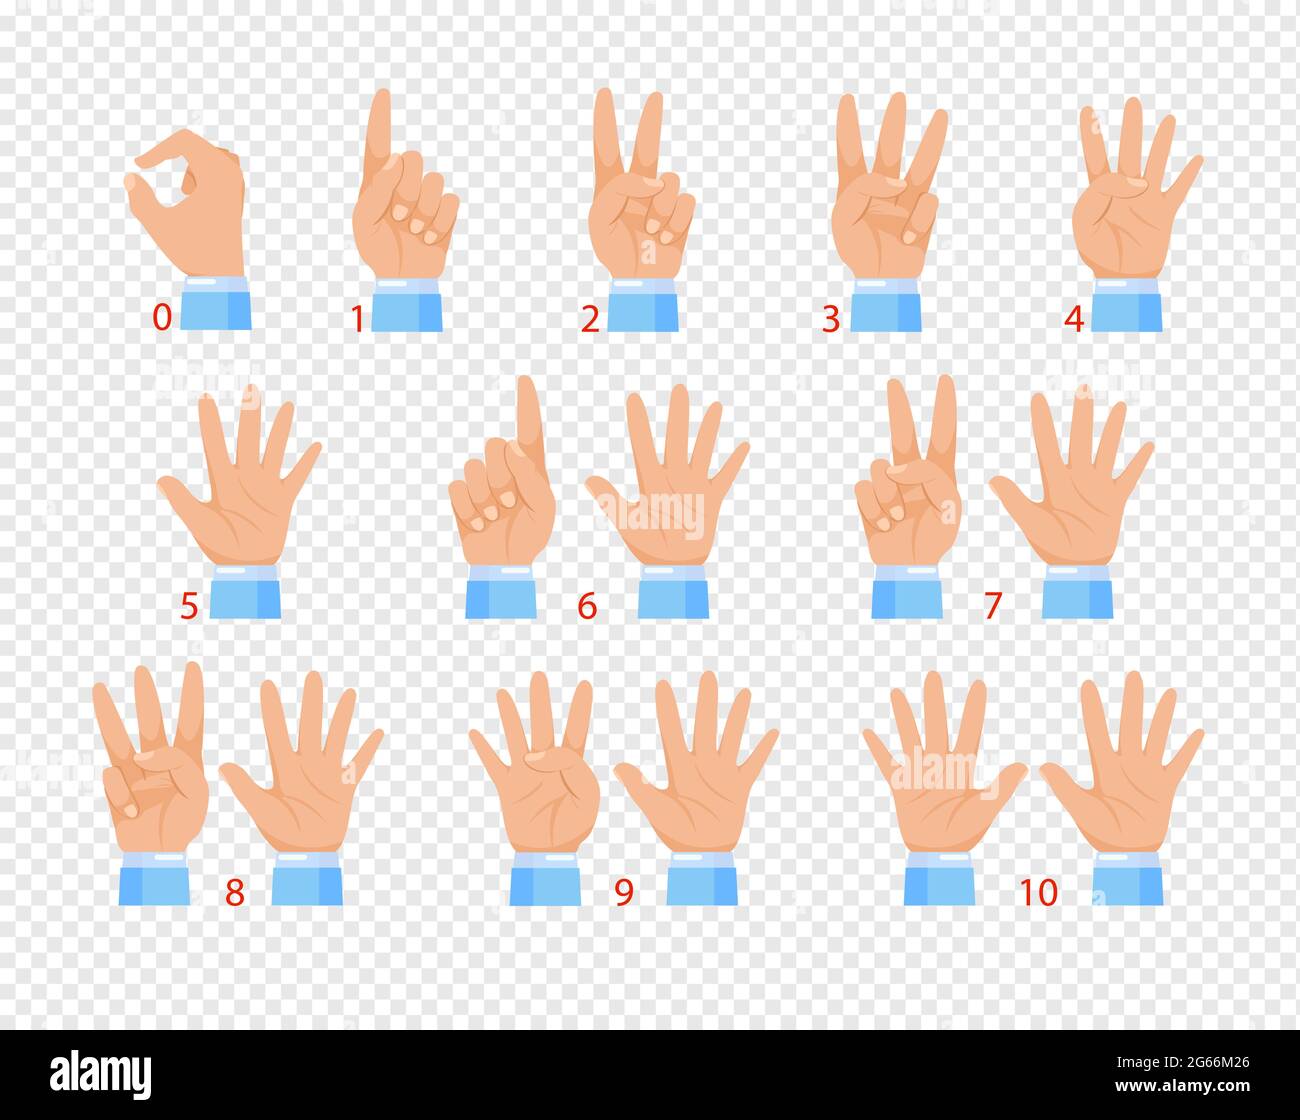 Vector illustration of hands in various gestures, showing different numbers by fingers. Flat cartoon design isolated on transparent background. Stock Vector